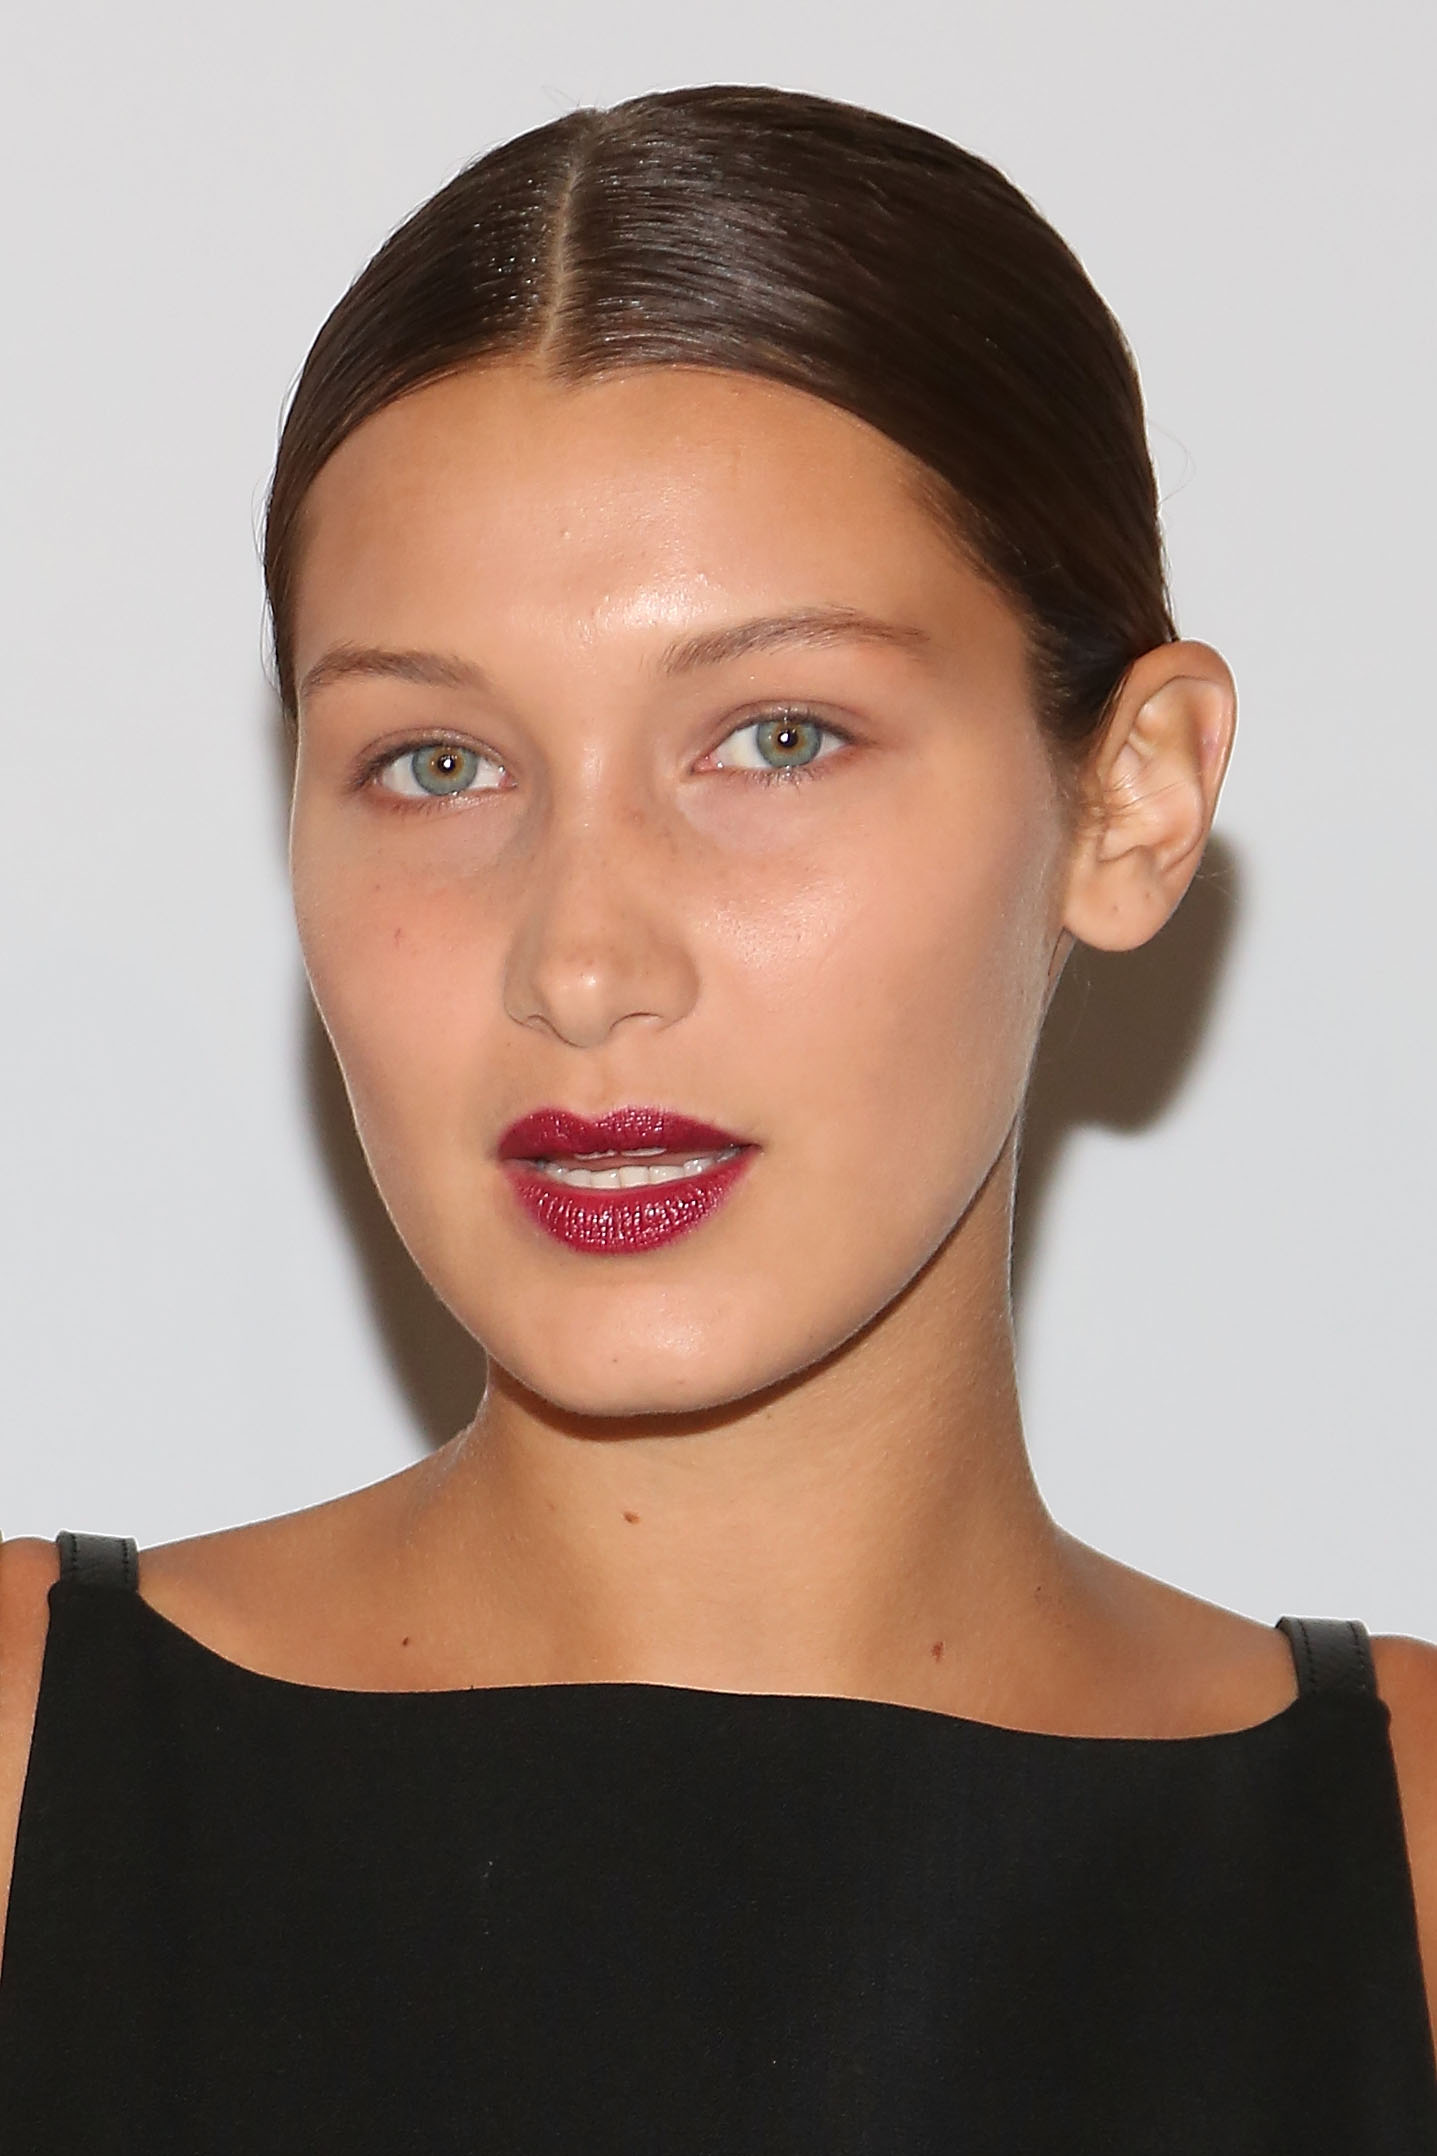 Bella Hadid attends the Reveal Calvin Klein Fragrance Launch party on September 8, 2014 in New York City. | Source: Getty Images